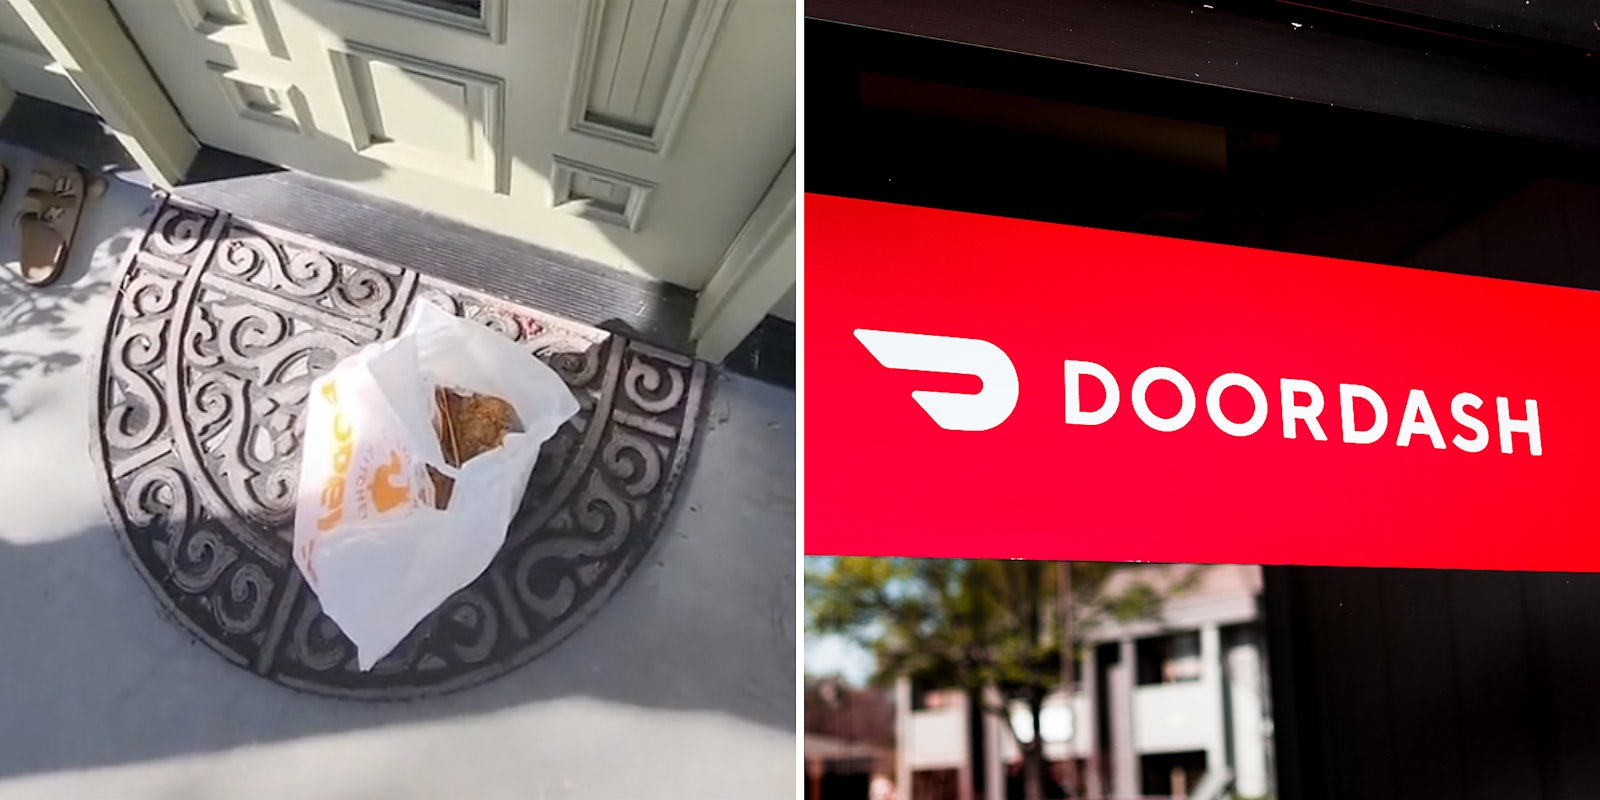 A bag of food on the ground (L) and a DoorDash sign (R).